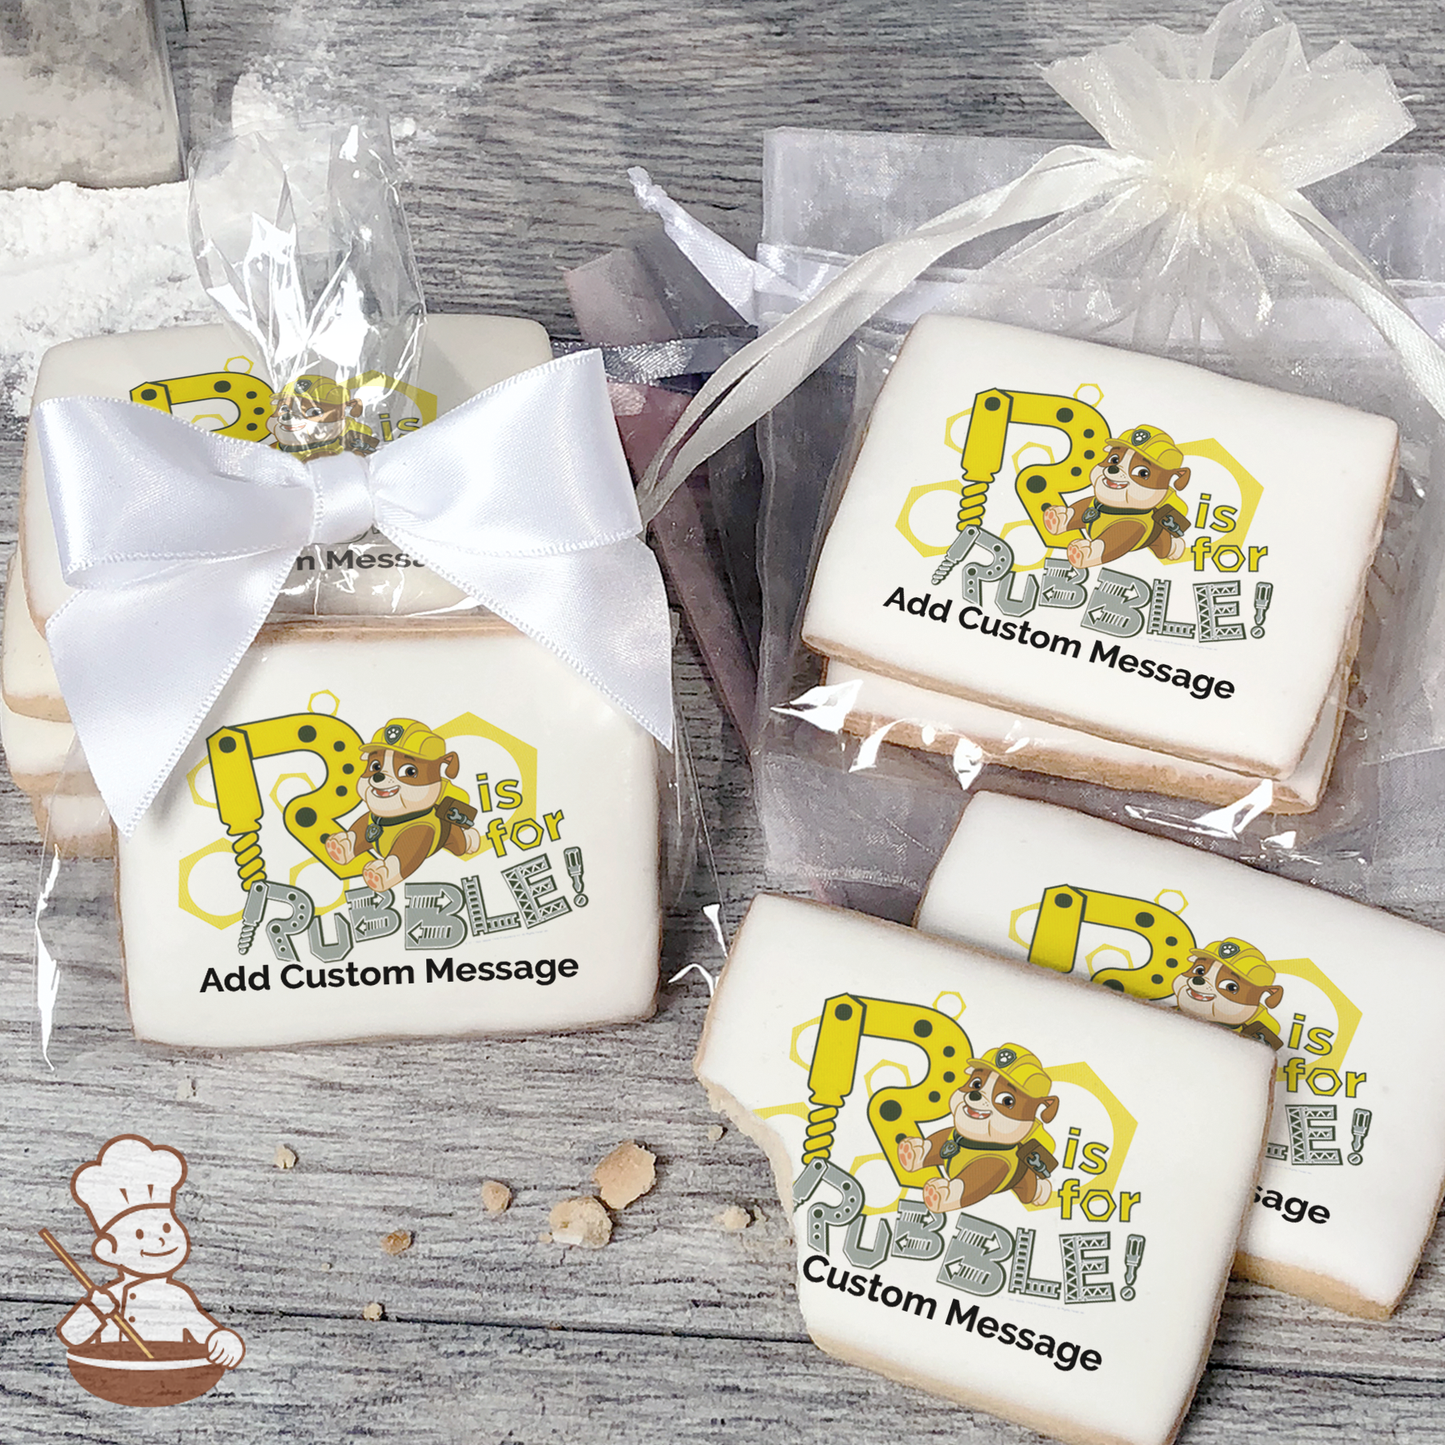 PAW Patrol R is for Rubble Custom Message Cookies (Rectangle)